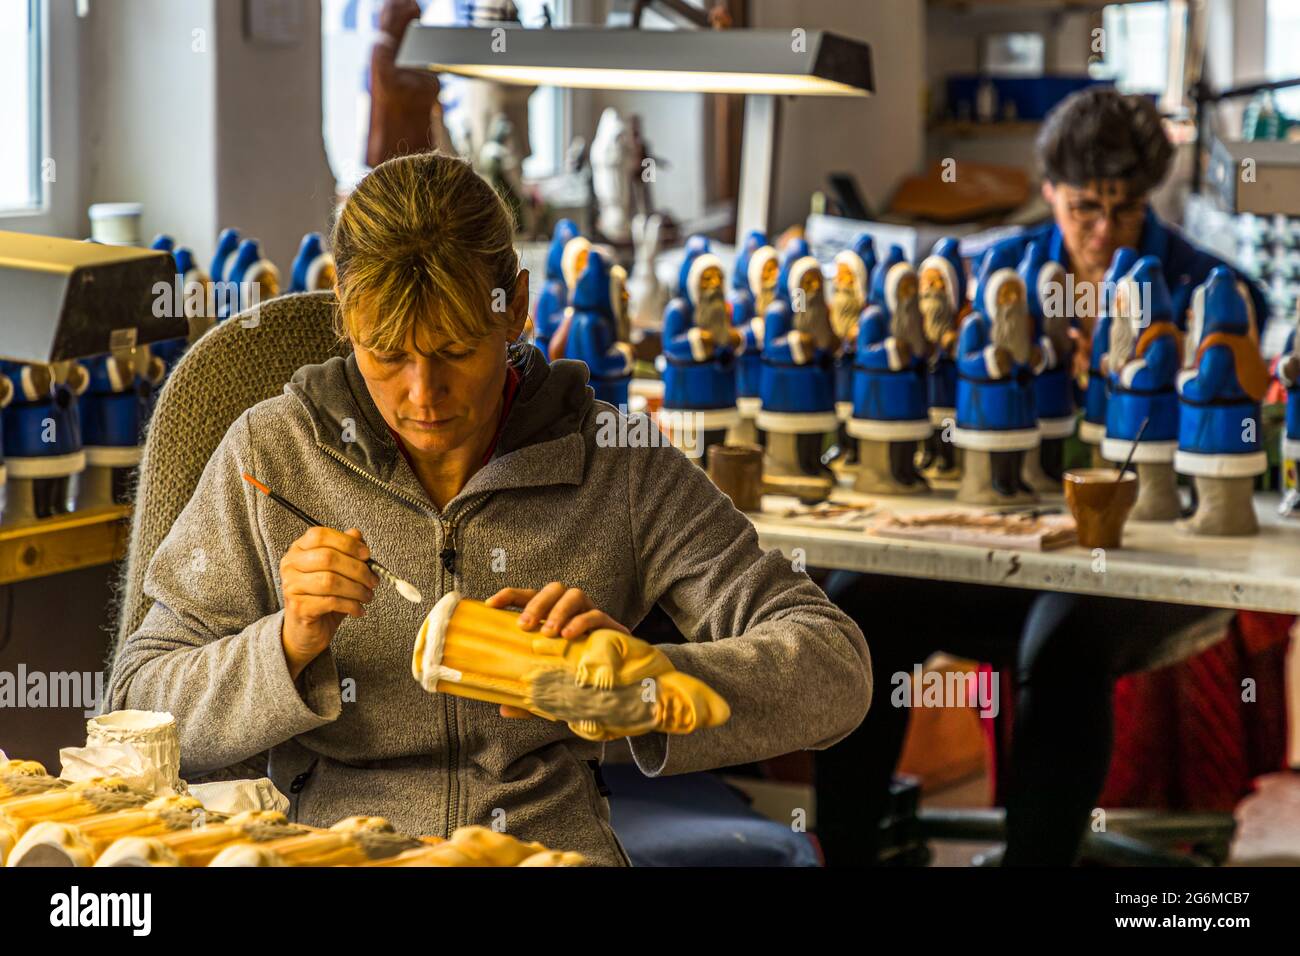 Marolin Manufacture founded by Richard Mahr produces finely detailed Papier-Mache Figurines in Steinach, Germany Stock Photo